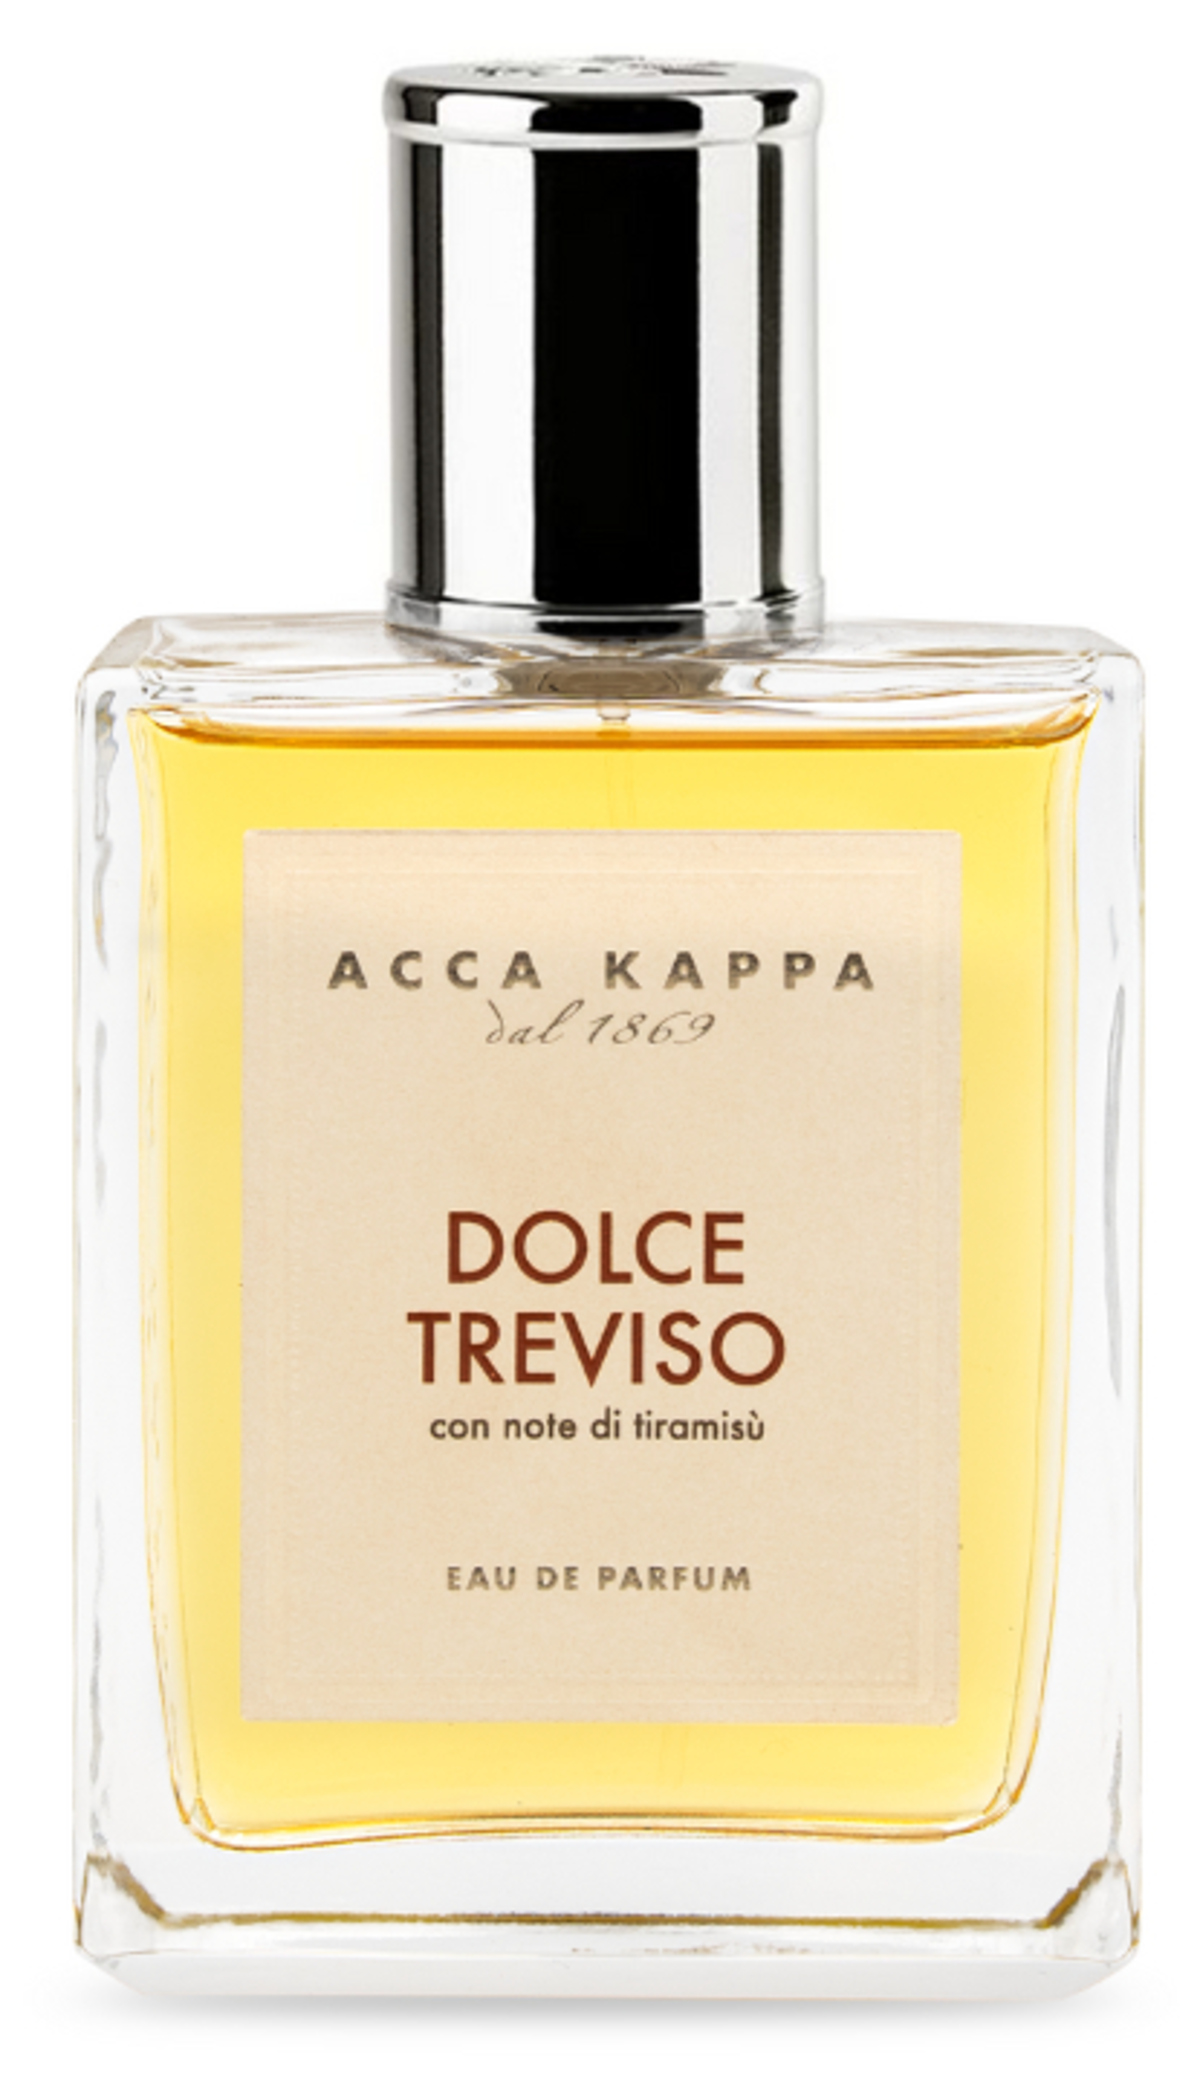 Dolce Treviso - Acca Kappa